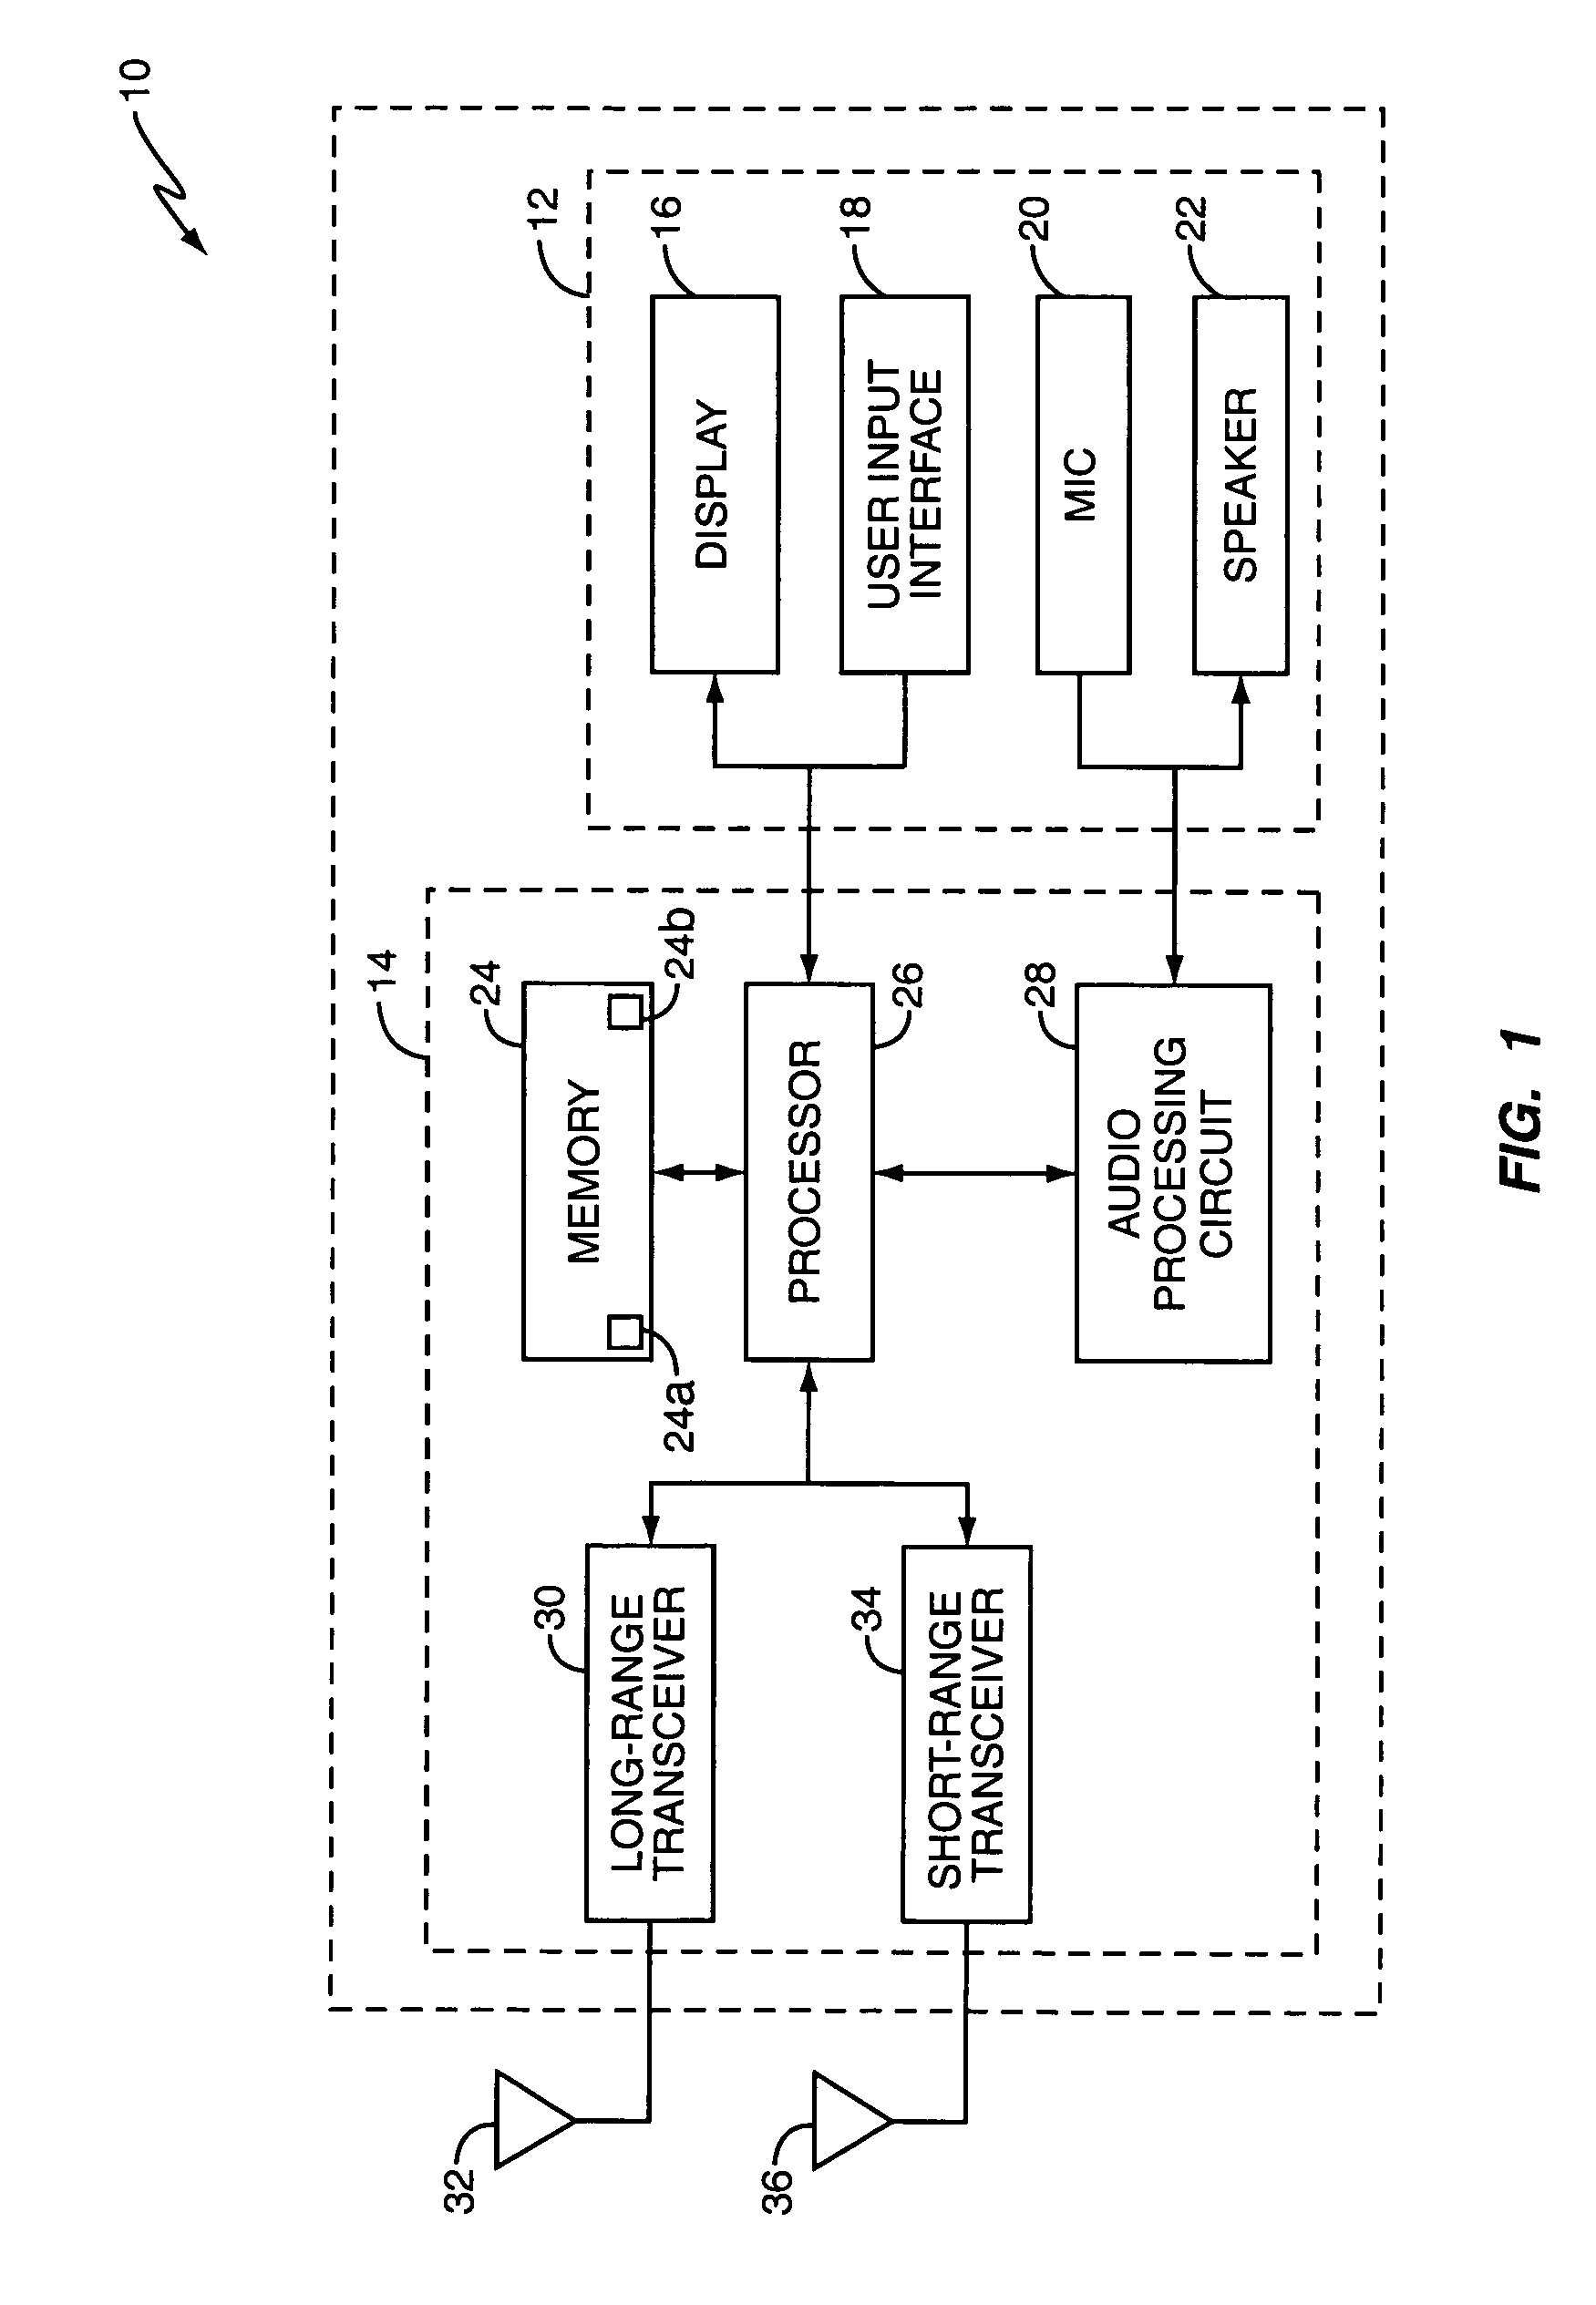 Updating presence in a wireless communications device